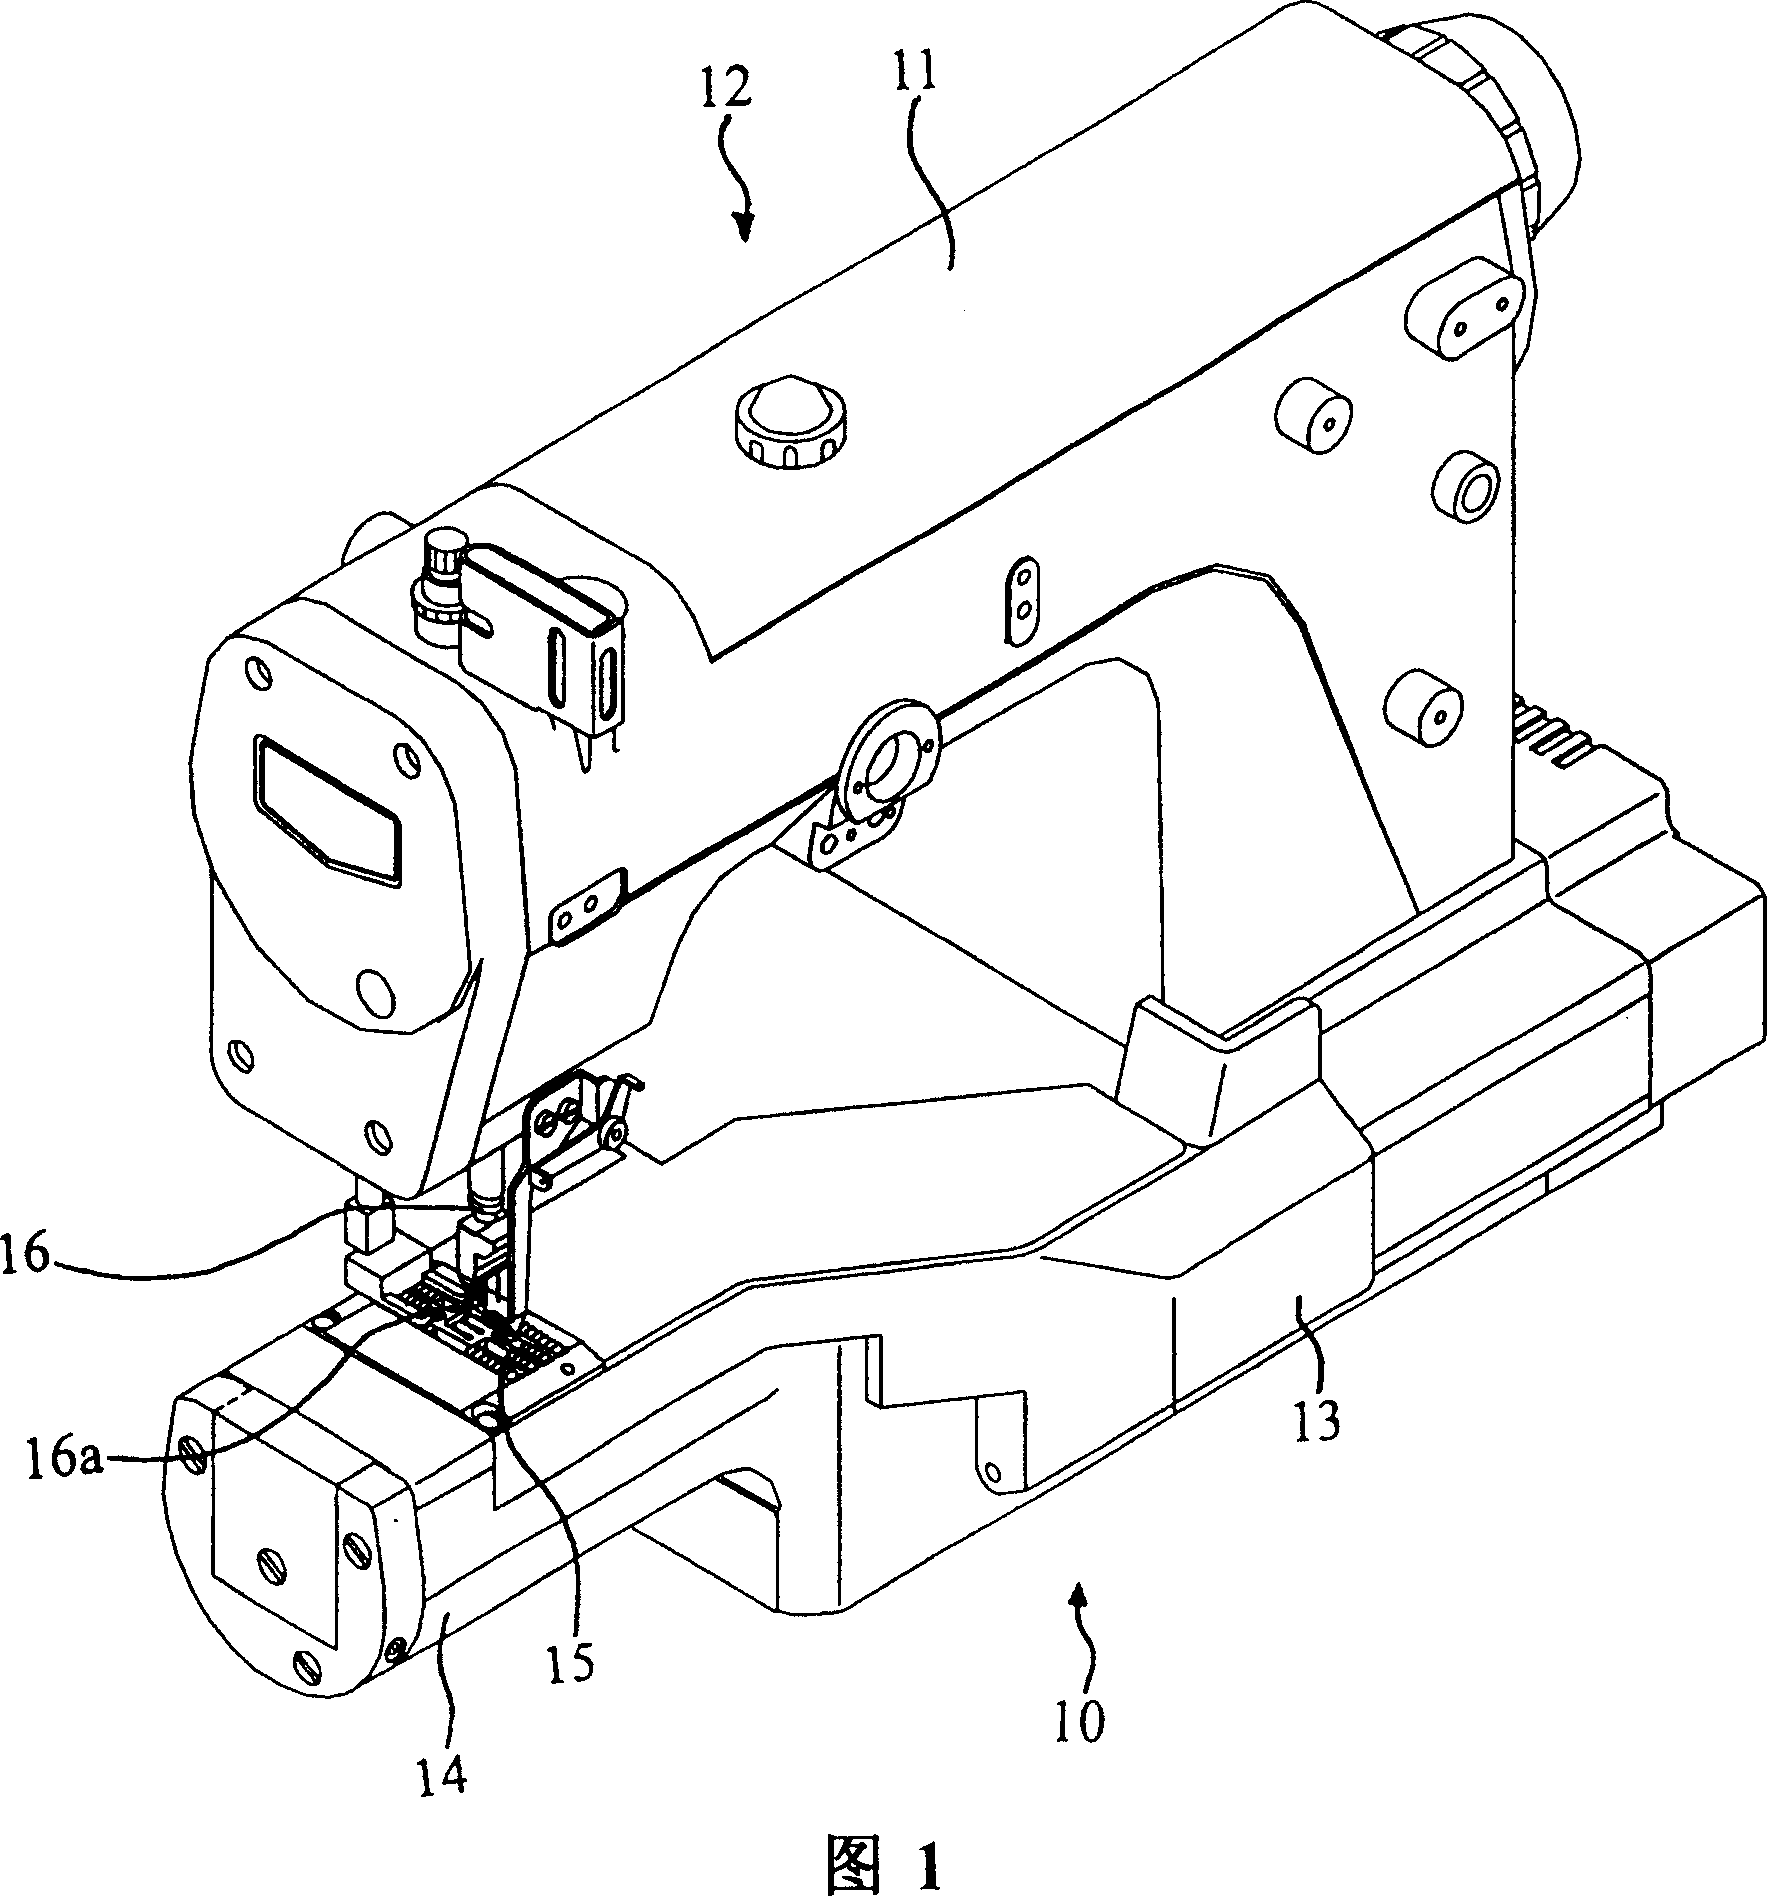 Transmission arrangement for transfer teeth of cylinder type sewing machine